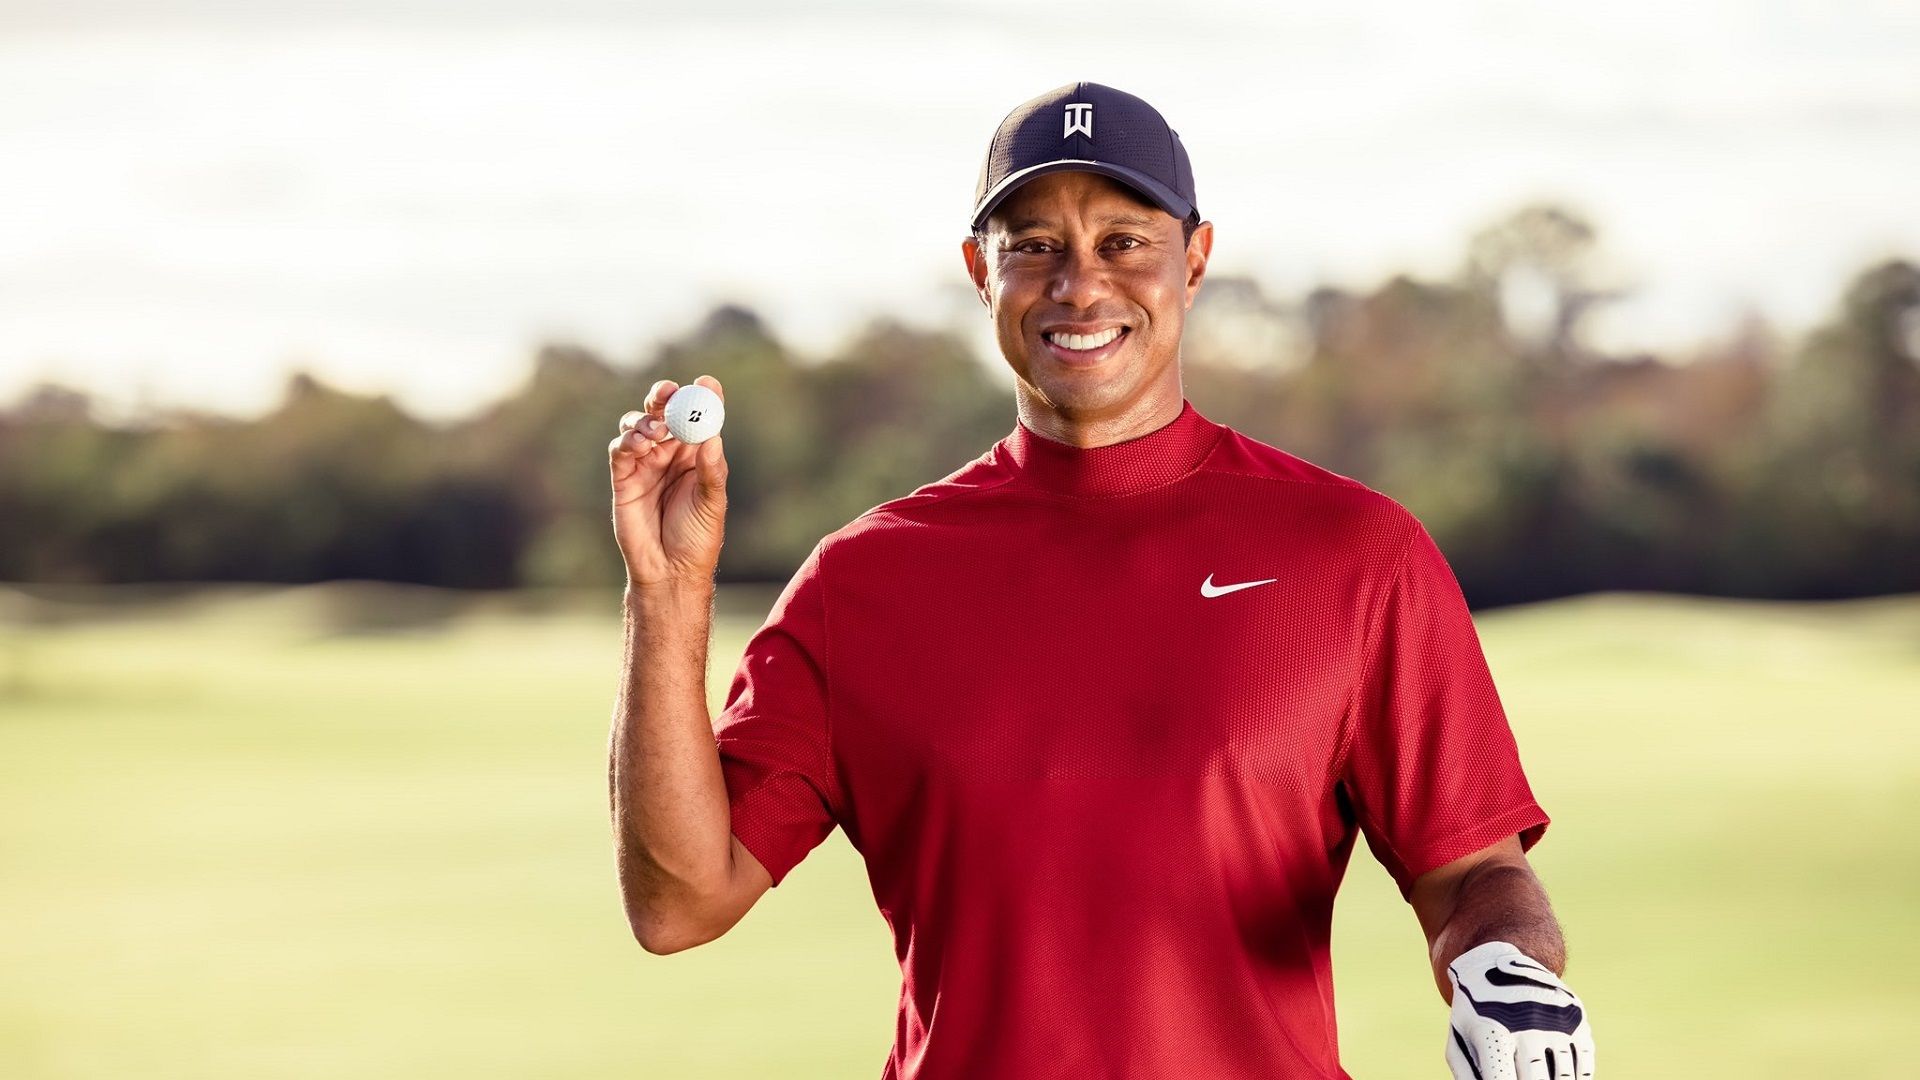 Tiger Woods Net Worth His Fancy Assets, Expensive Purchases And More